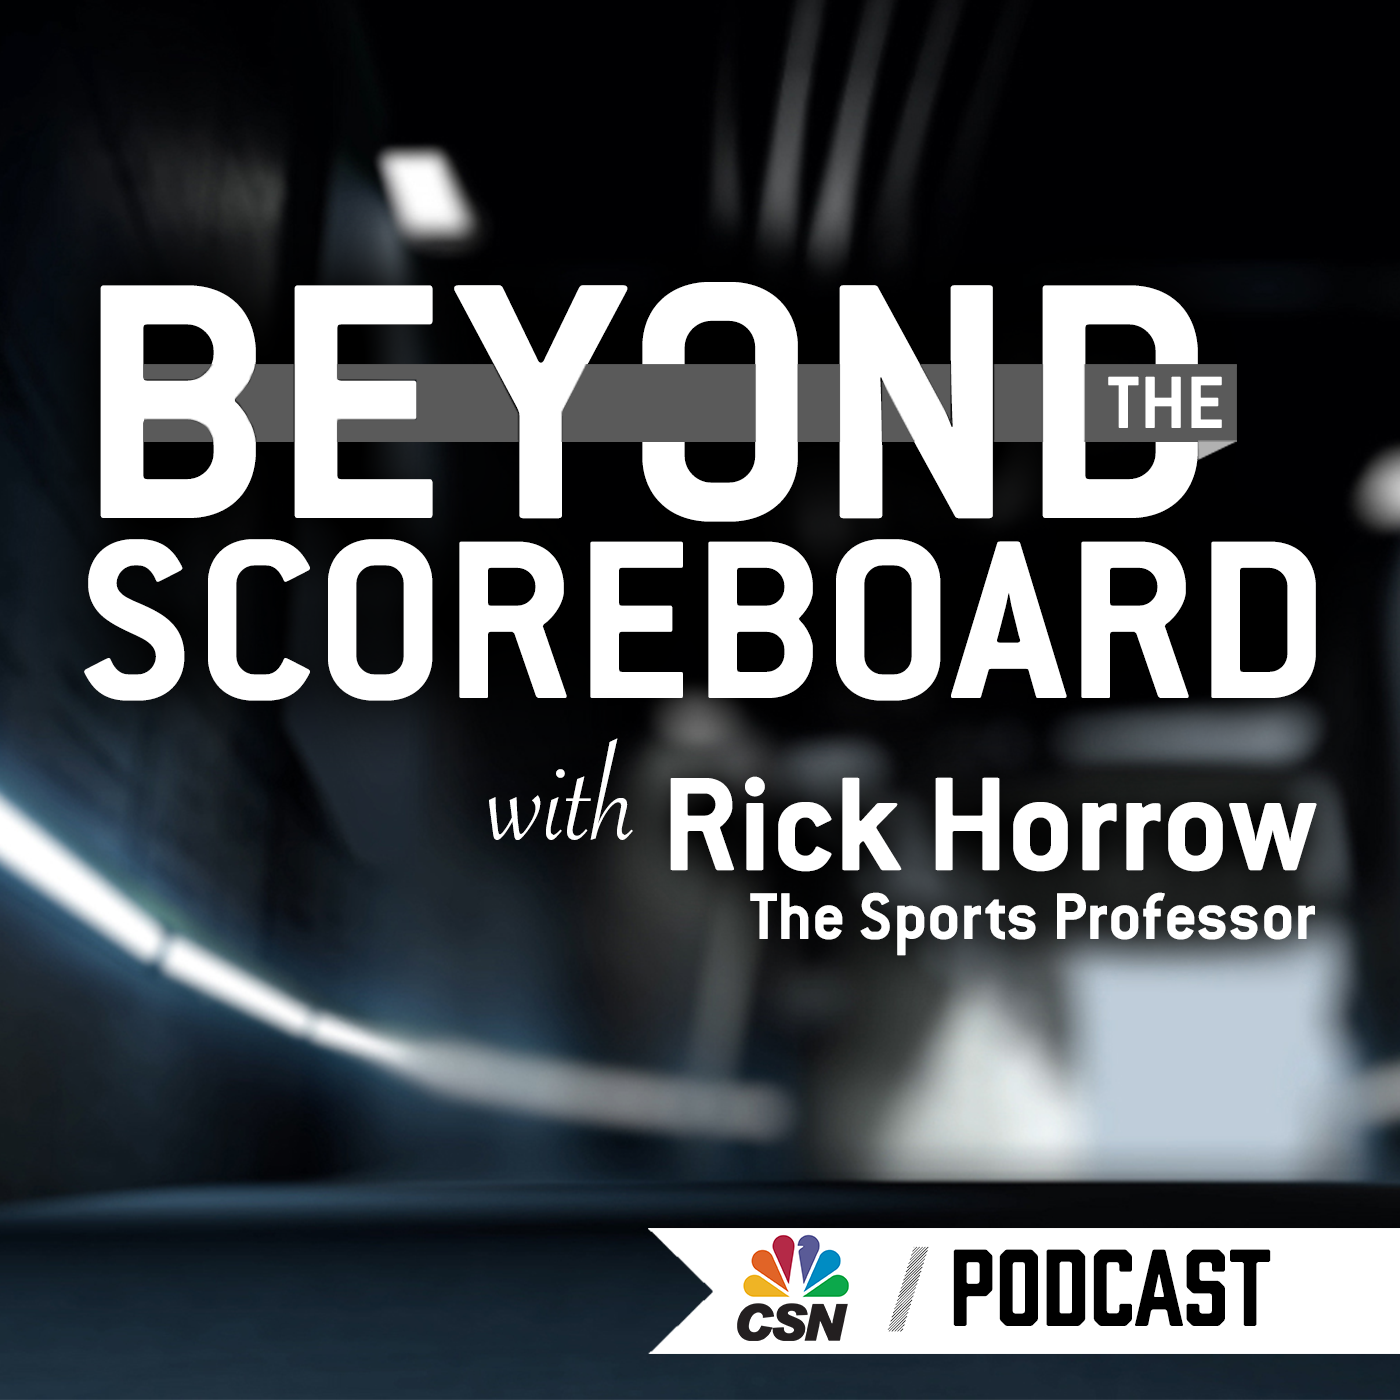 Preview: Rick Horrow hosts ”Beyond the Scoreboard”